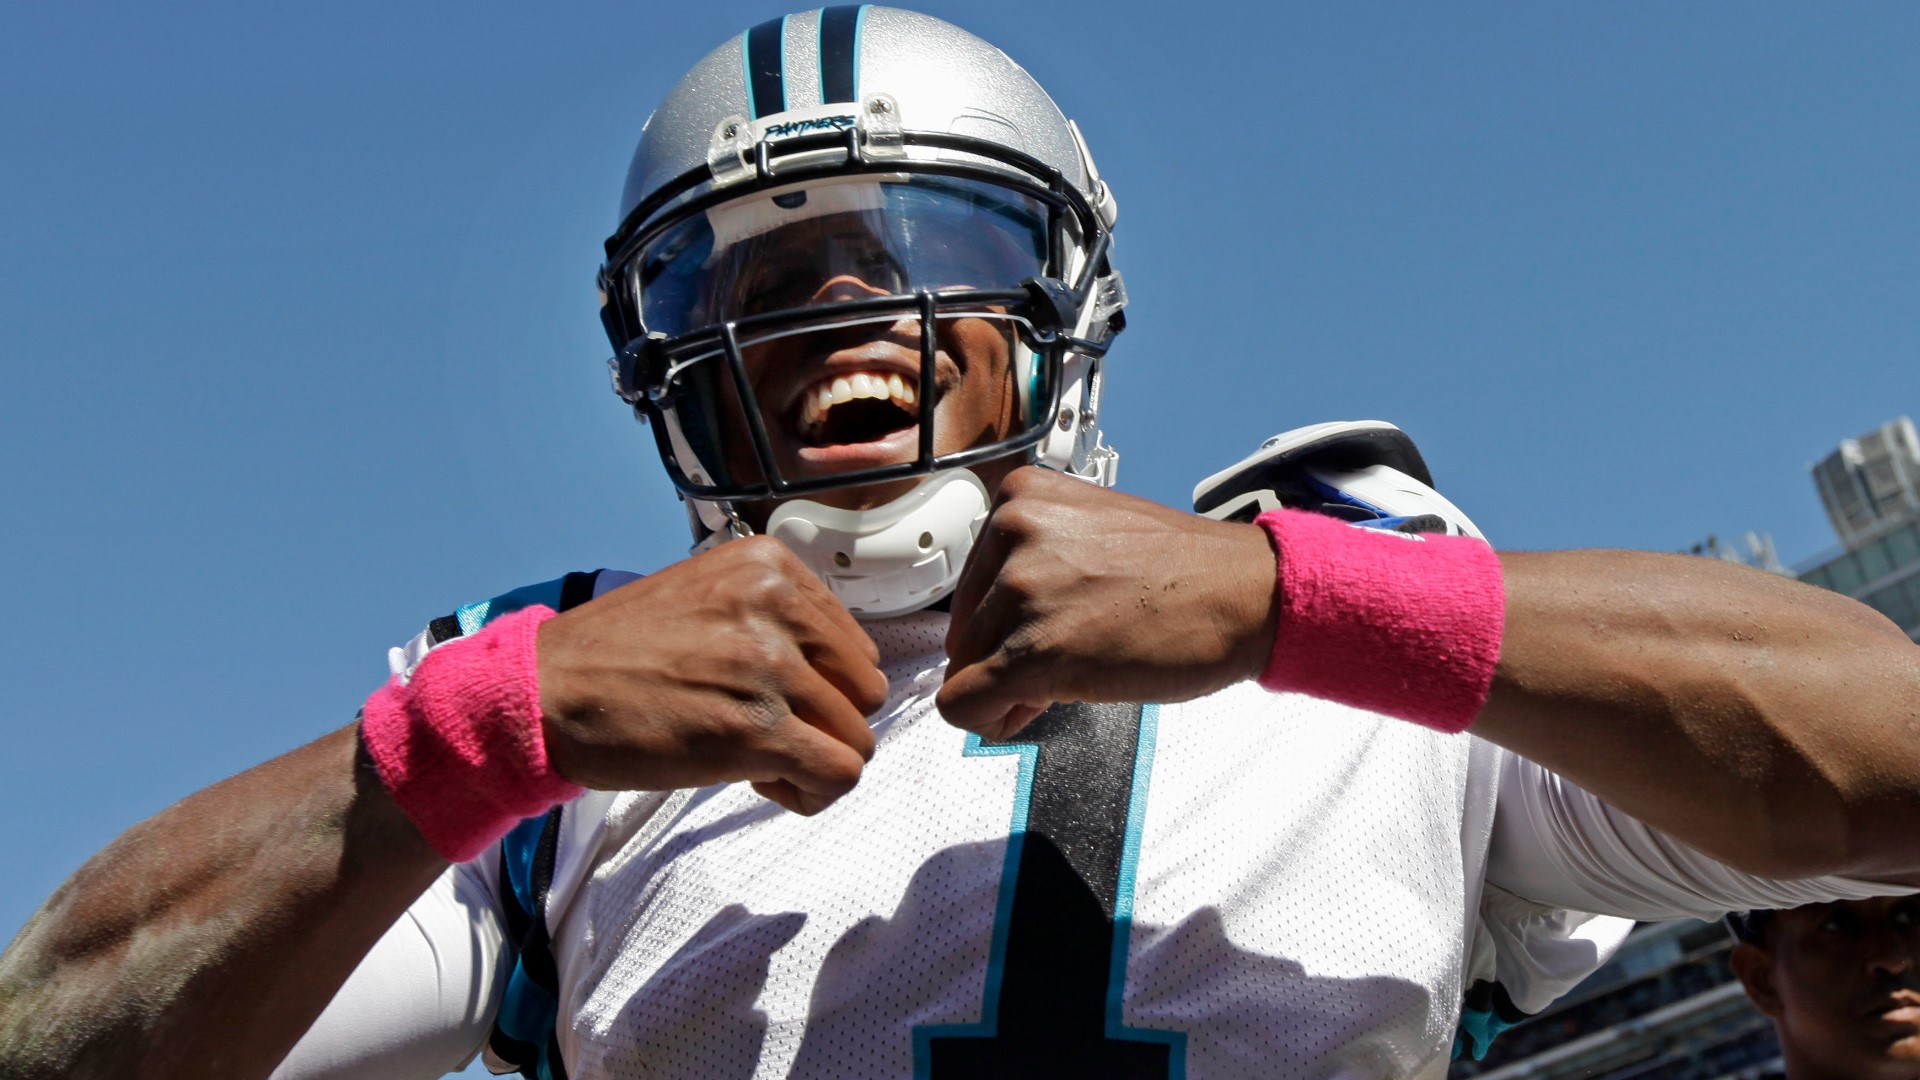 After nearly two seasons away, Panthers legend Cam Newton is returning to the team to finish the 2021 season.